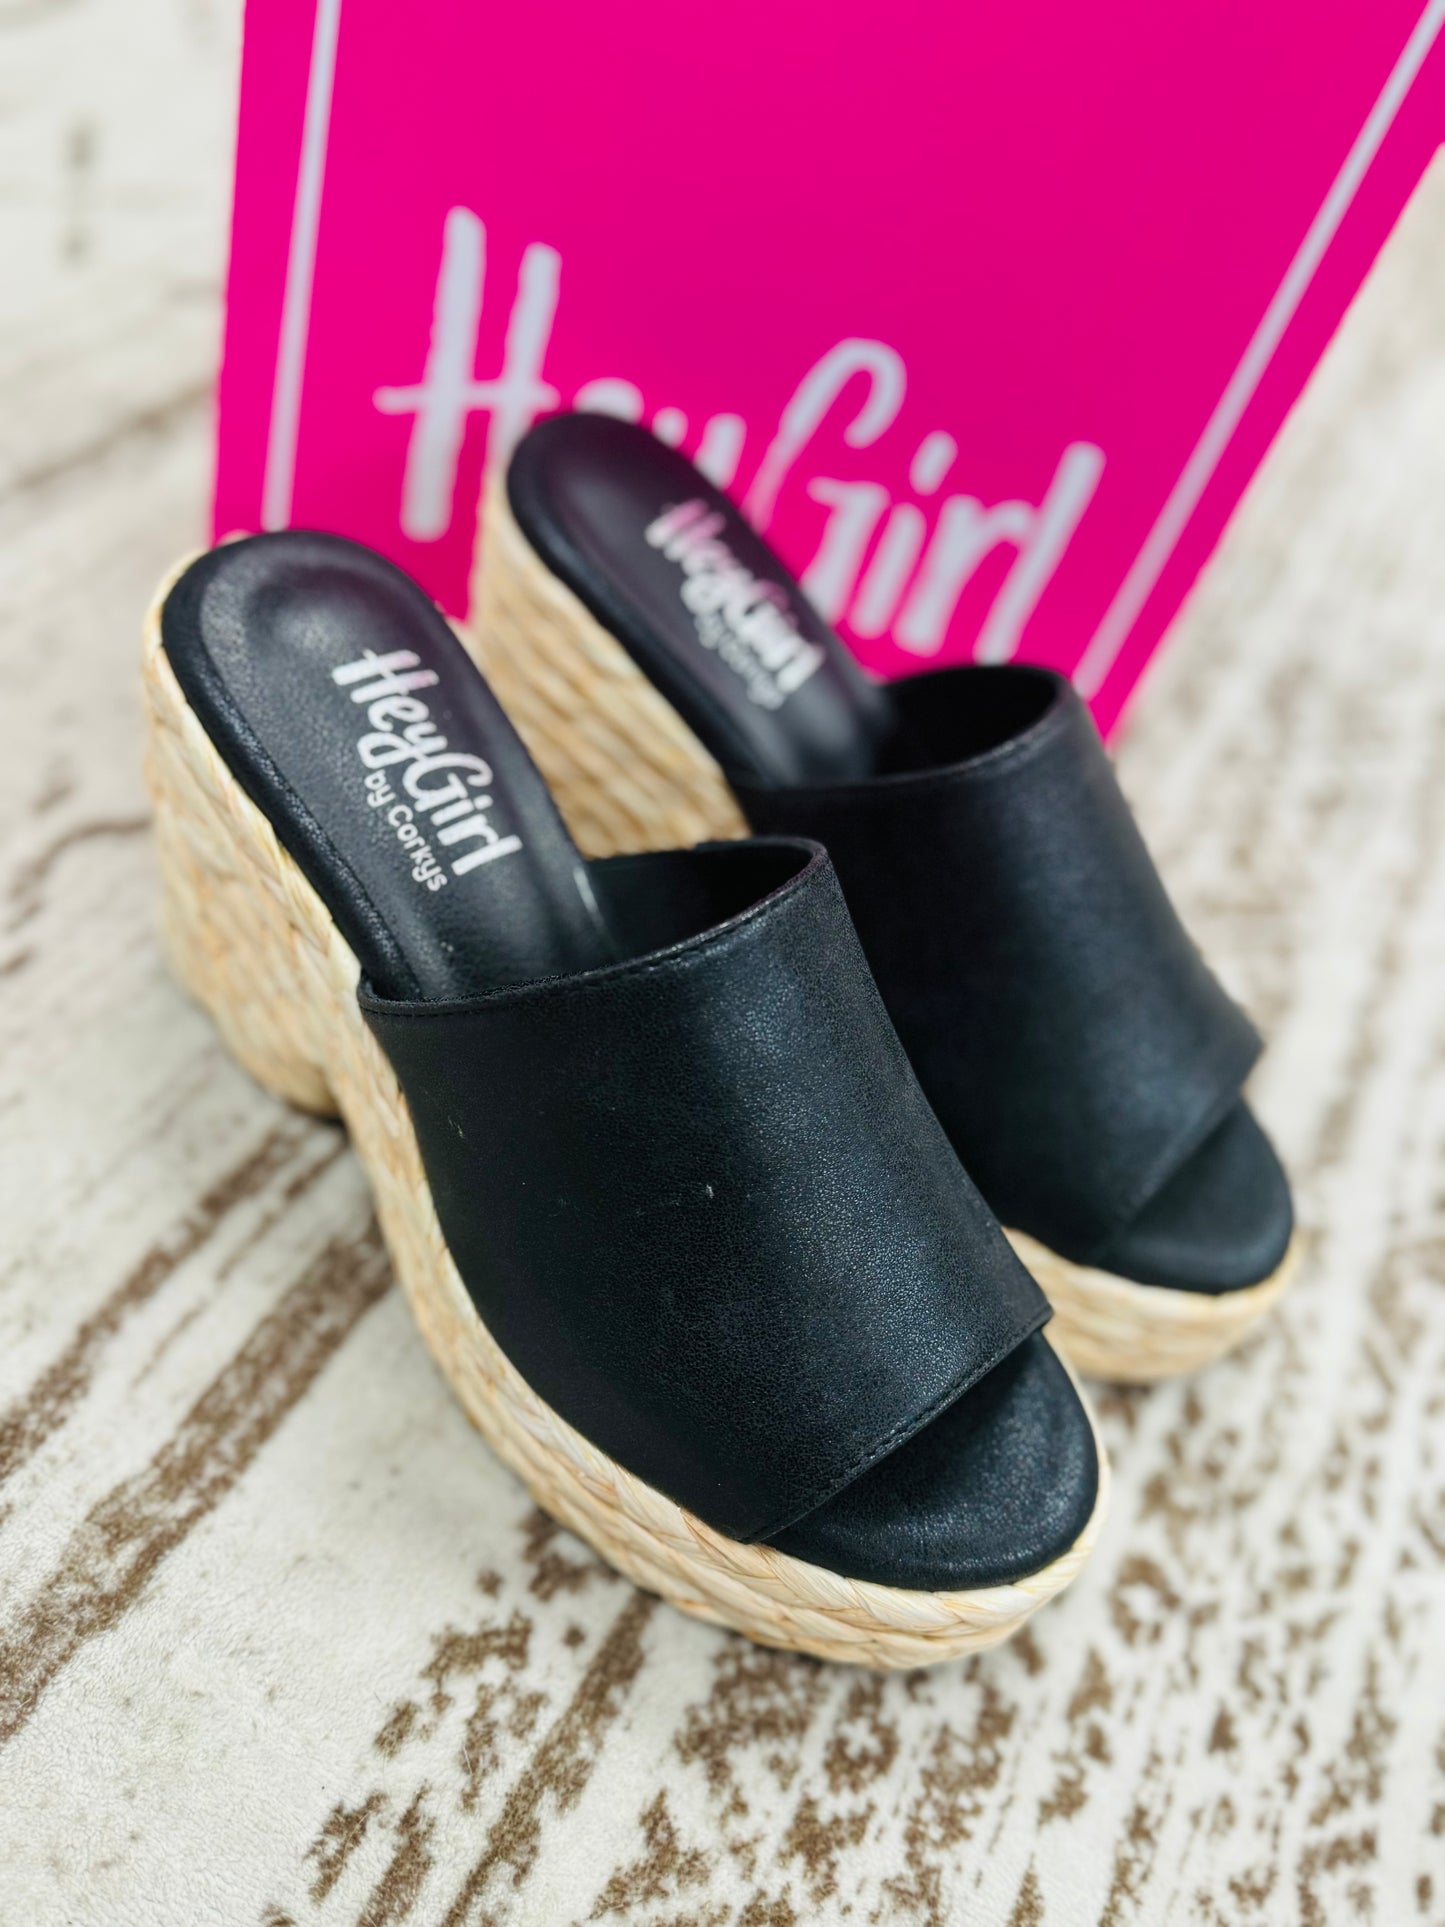 Corky's Solstice Wedge Sandal